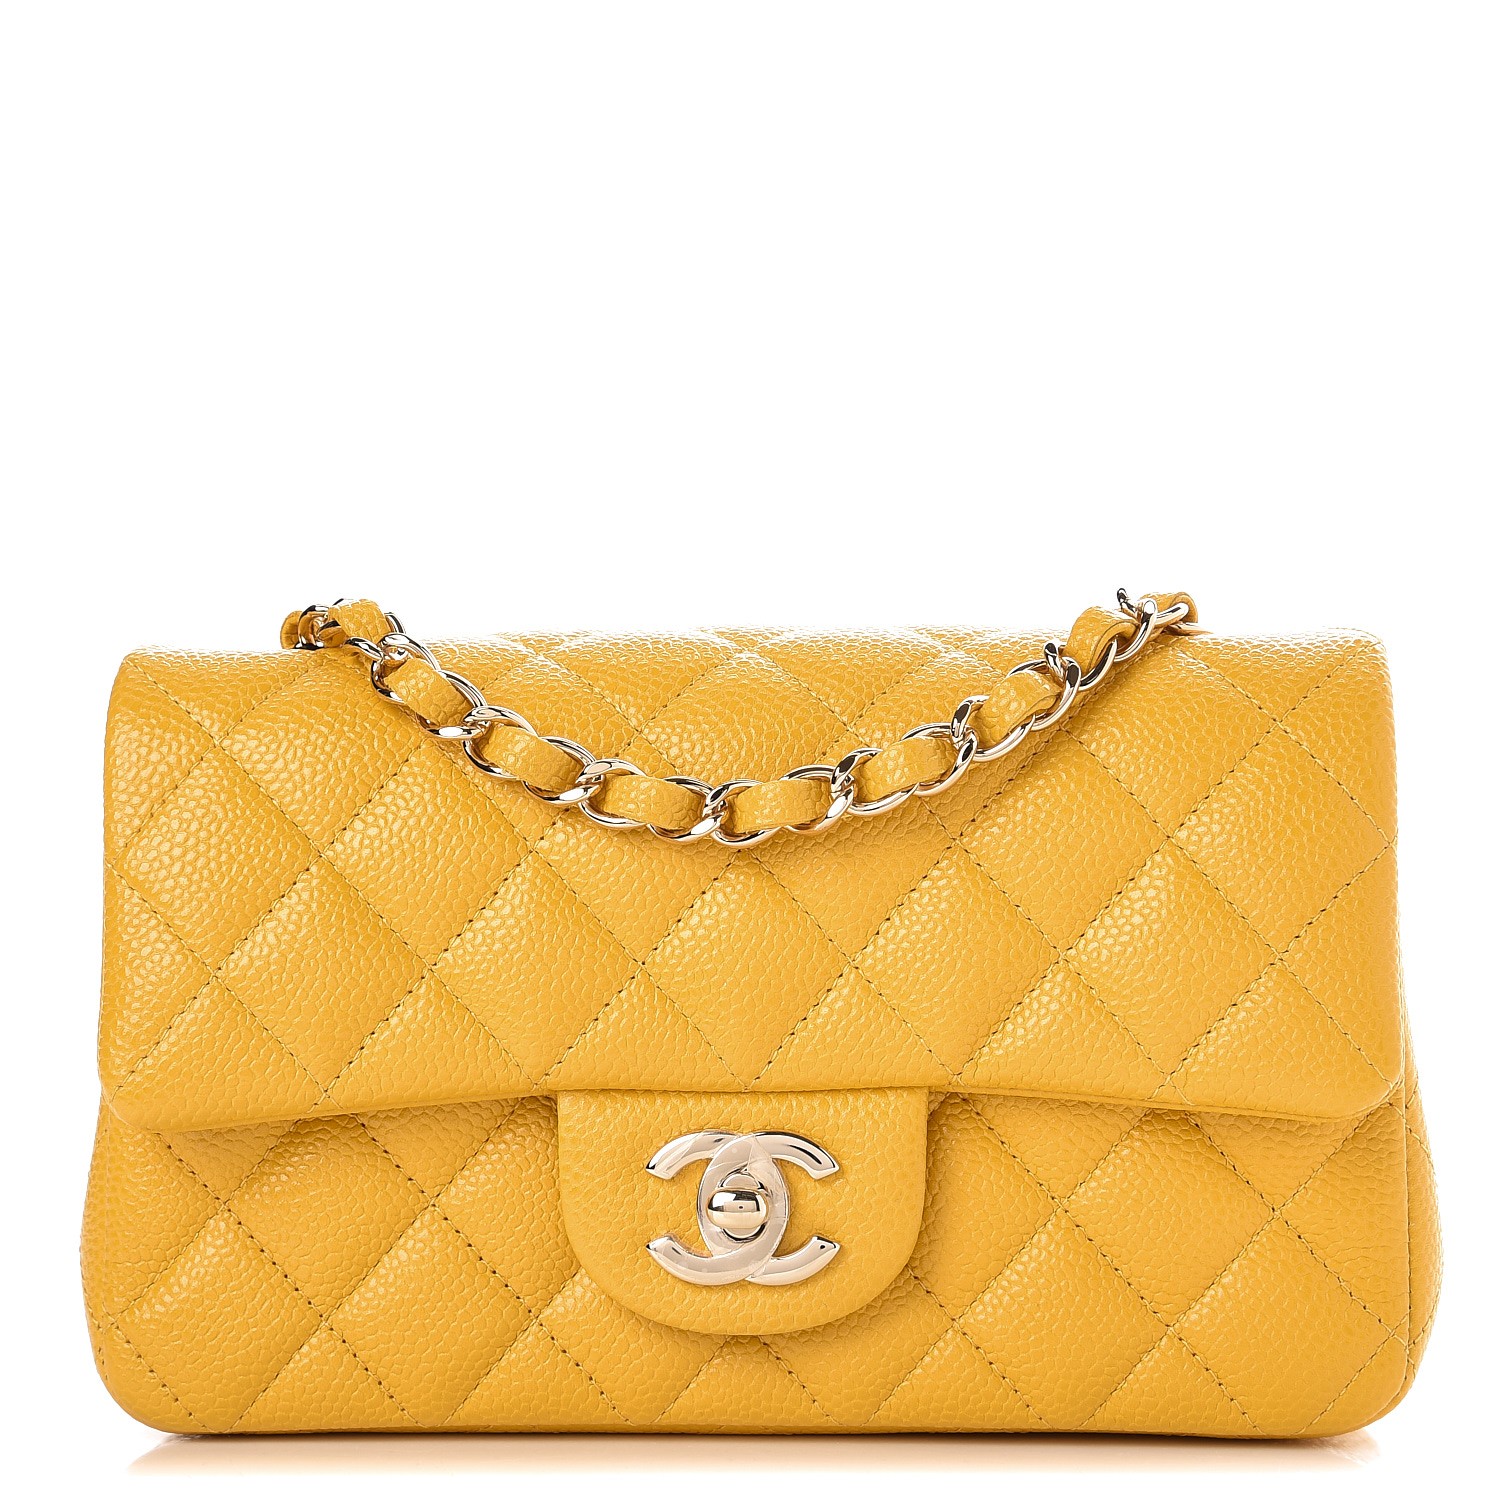 CHANEL Caviar Quilted Mini Rectangular Flap Yellow 256933 | FASHIONPHILE